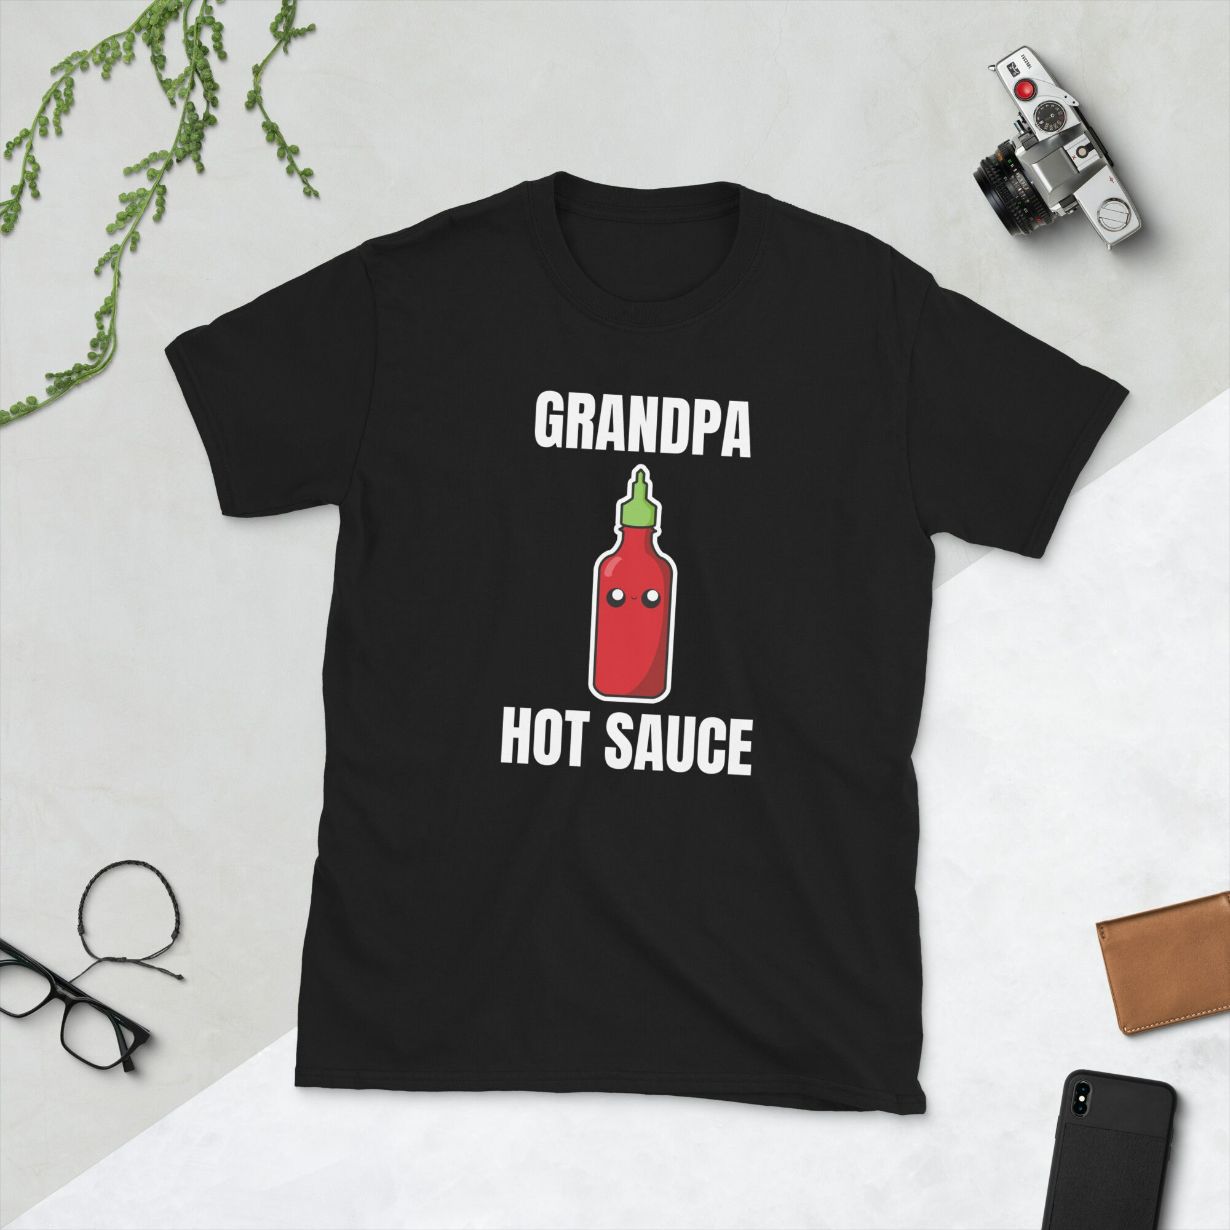 Grandpa Hot Sauce Spicy Food Spice Lover Kawaii Cute Asia Asian Food Foodie Funny Pun Gift Idea Birthday Present Short-Sleeve Unisex T-Shirt